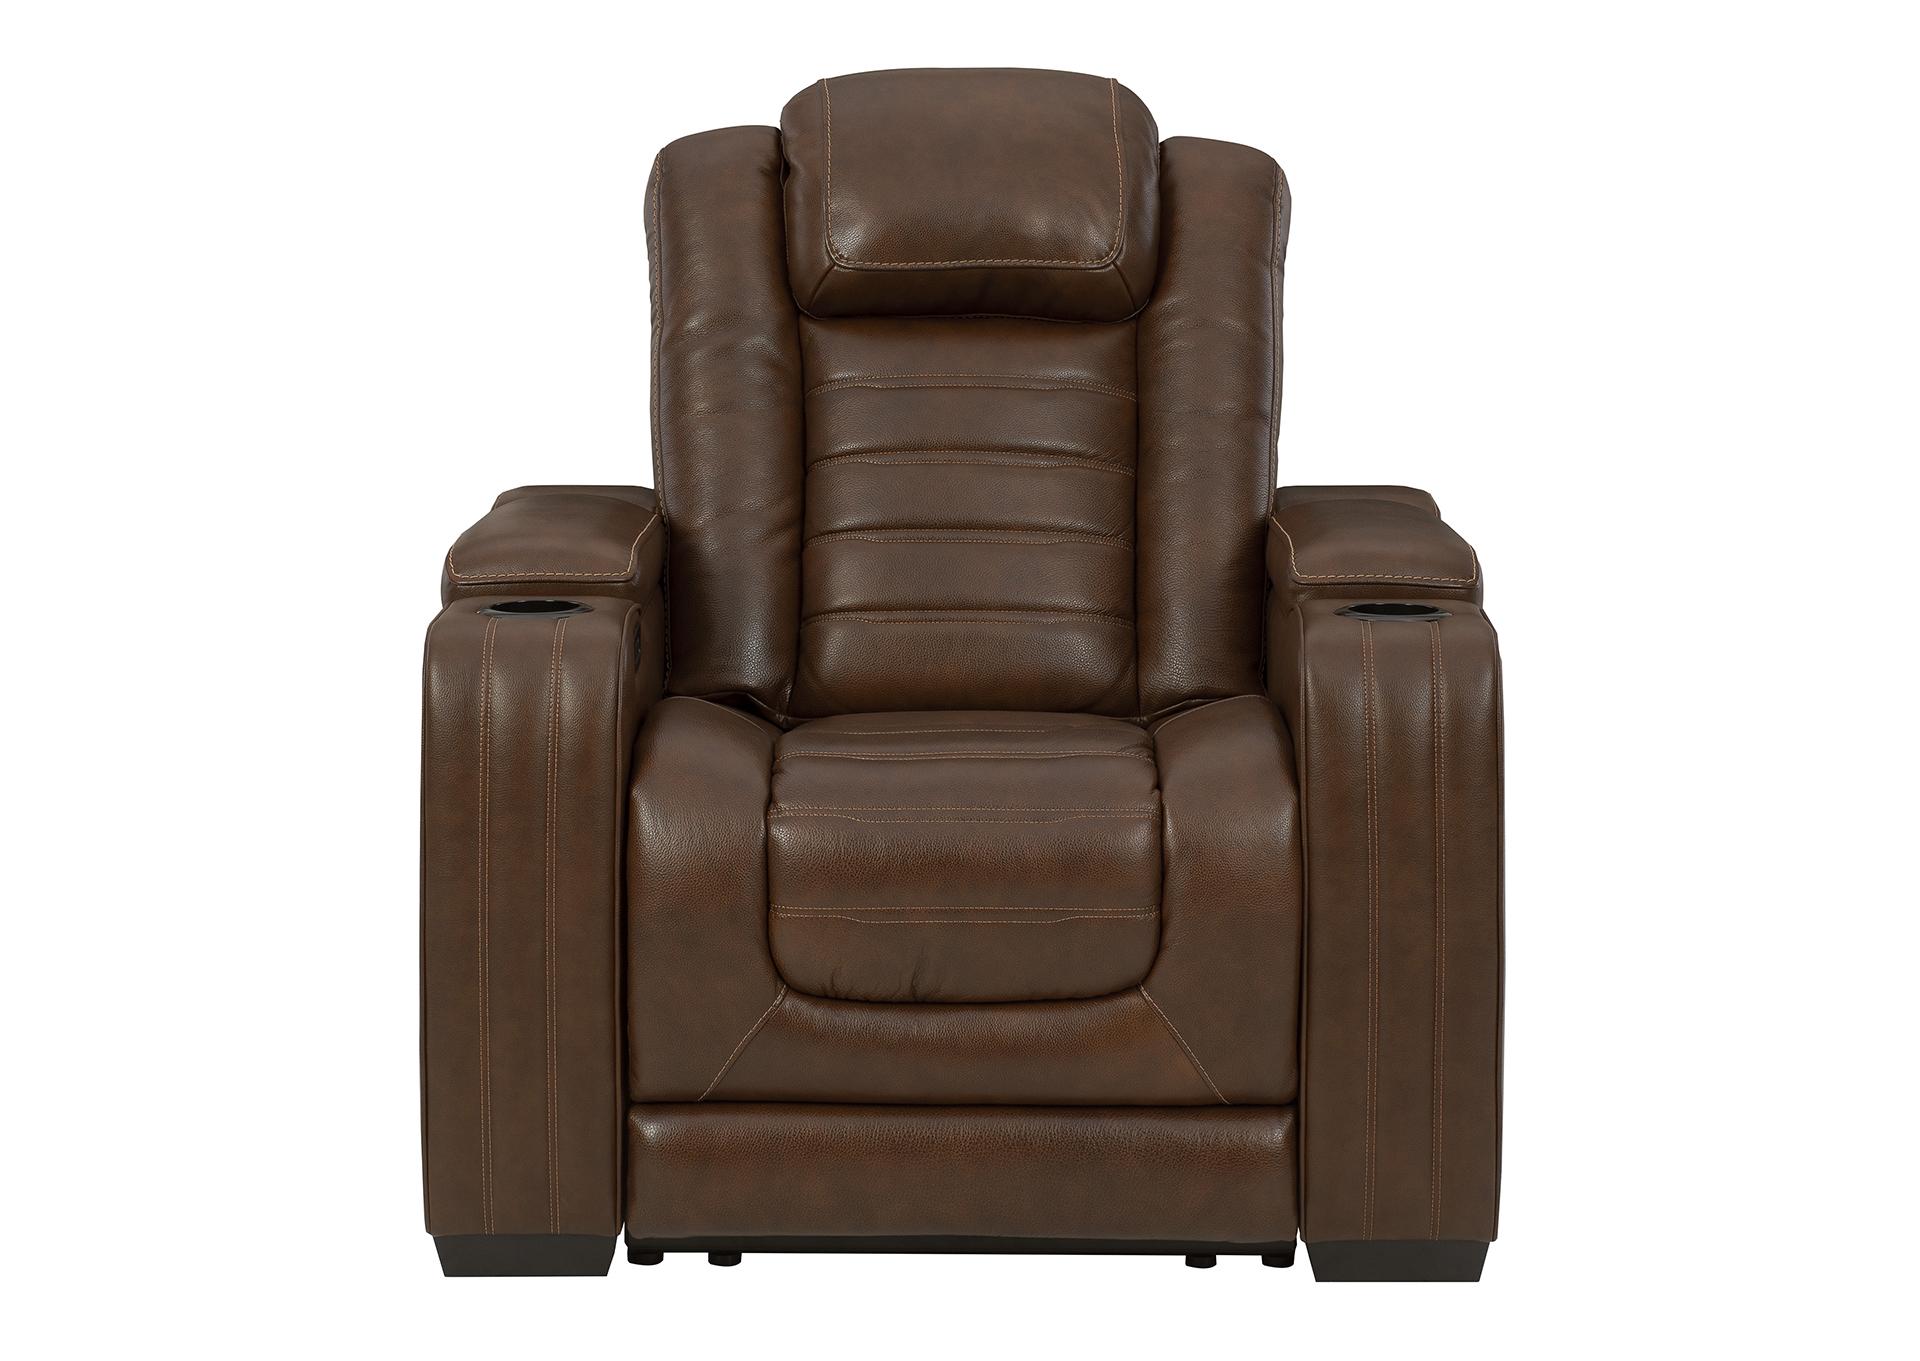 BACKTRACK CHOCOLATE LEATHER POWER RECLINER